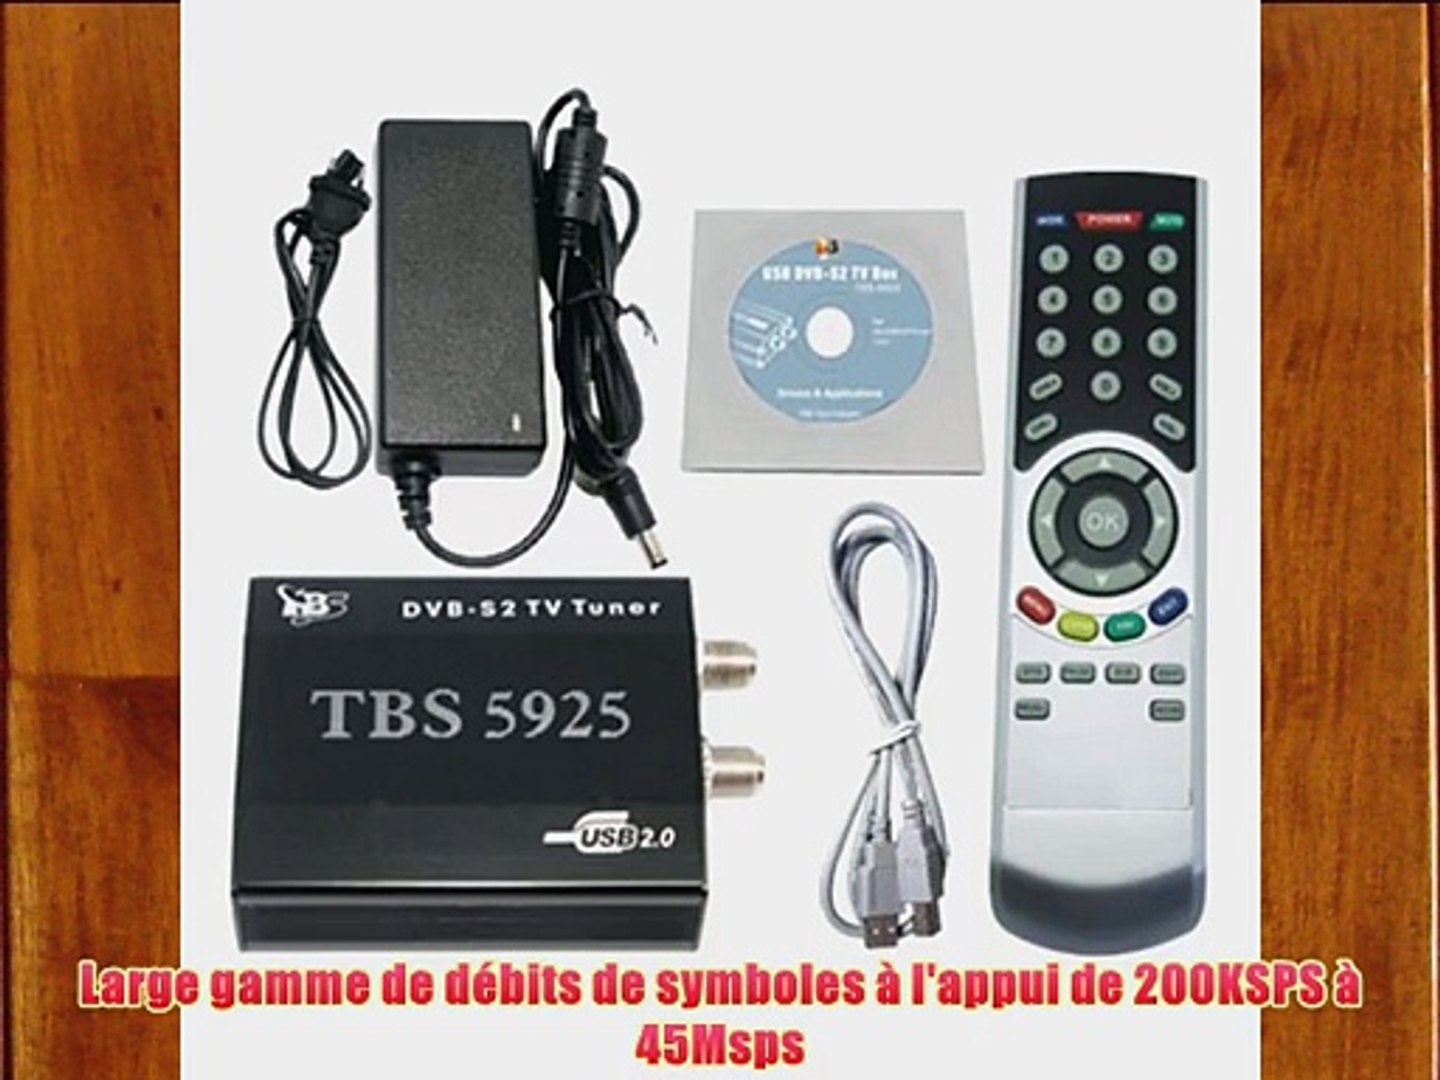 TBS 5925 external USB 2.0 DVB-S2 HD satellite tuner box for  PCprofessionnelle num?rique bo?tier - video Dailymotion